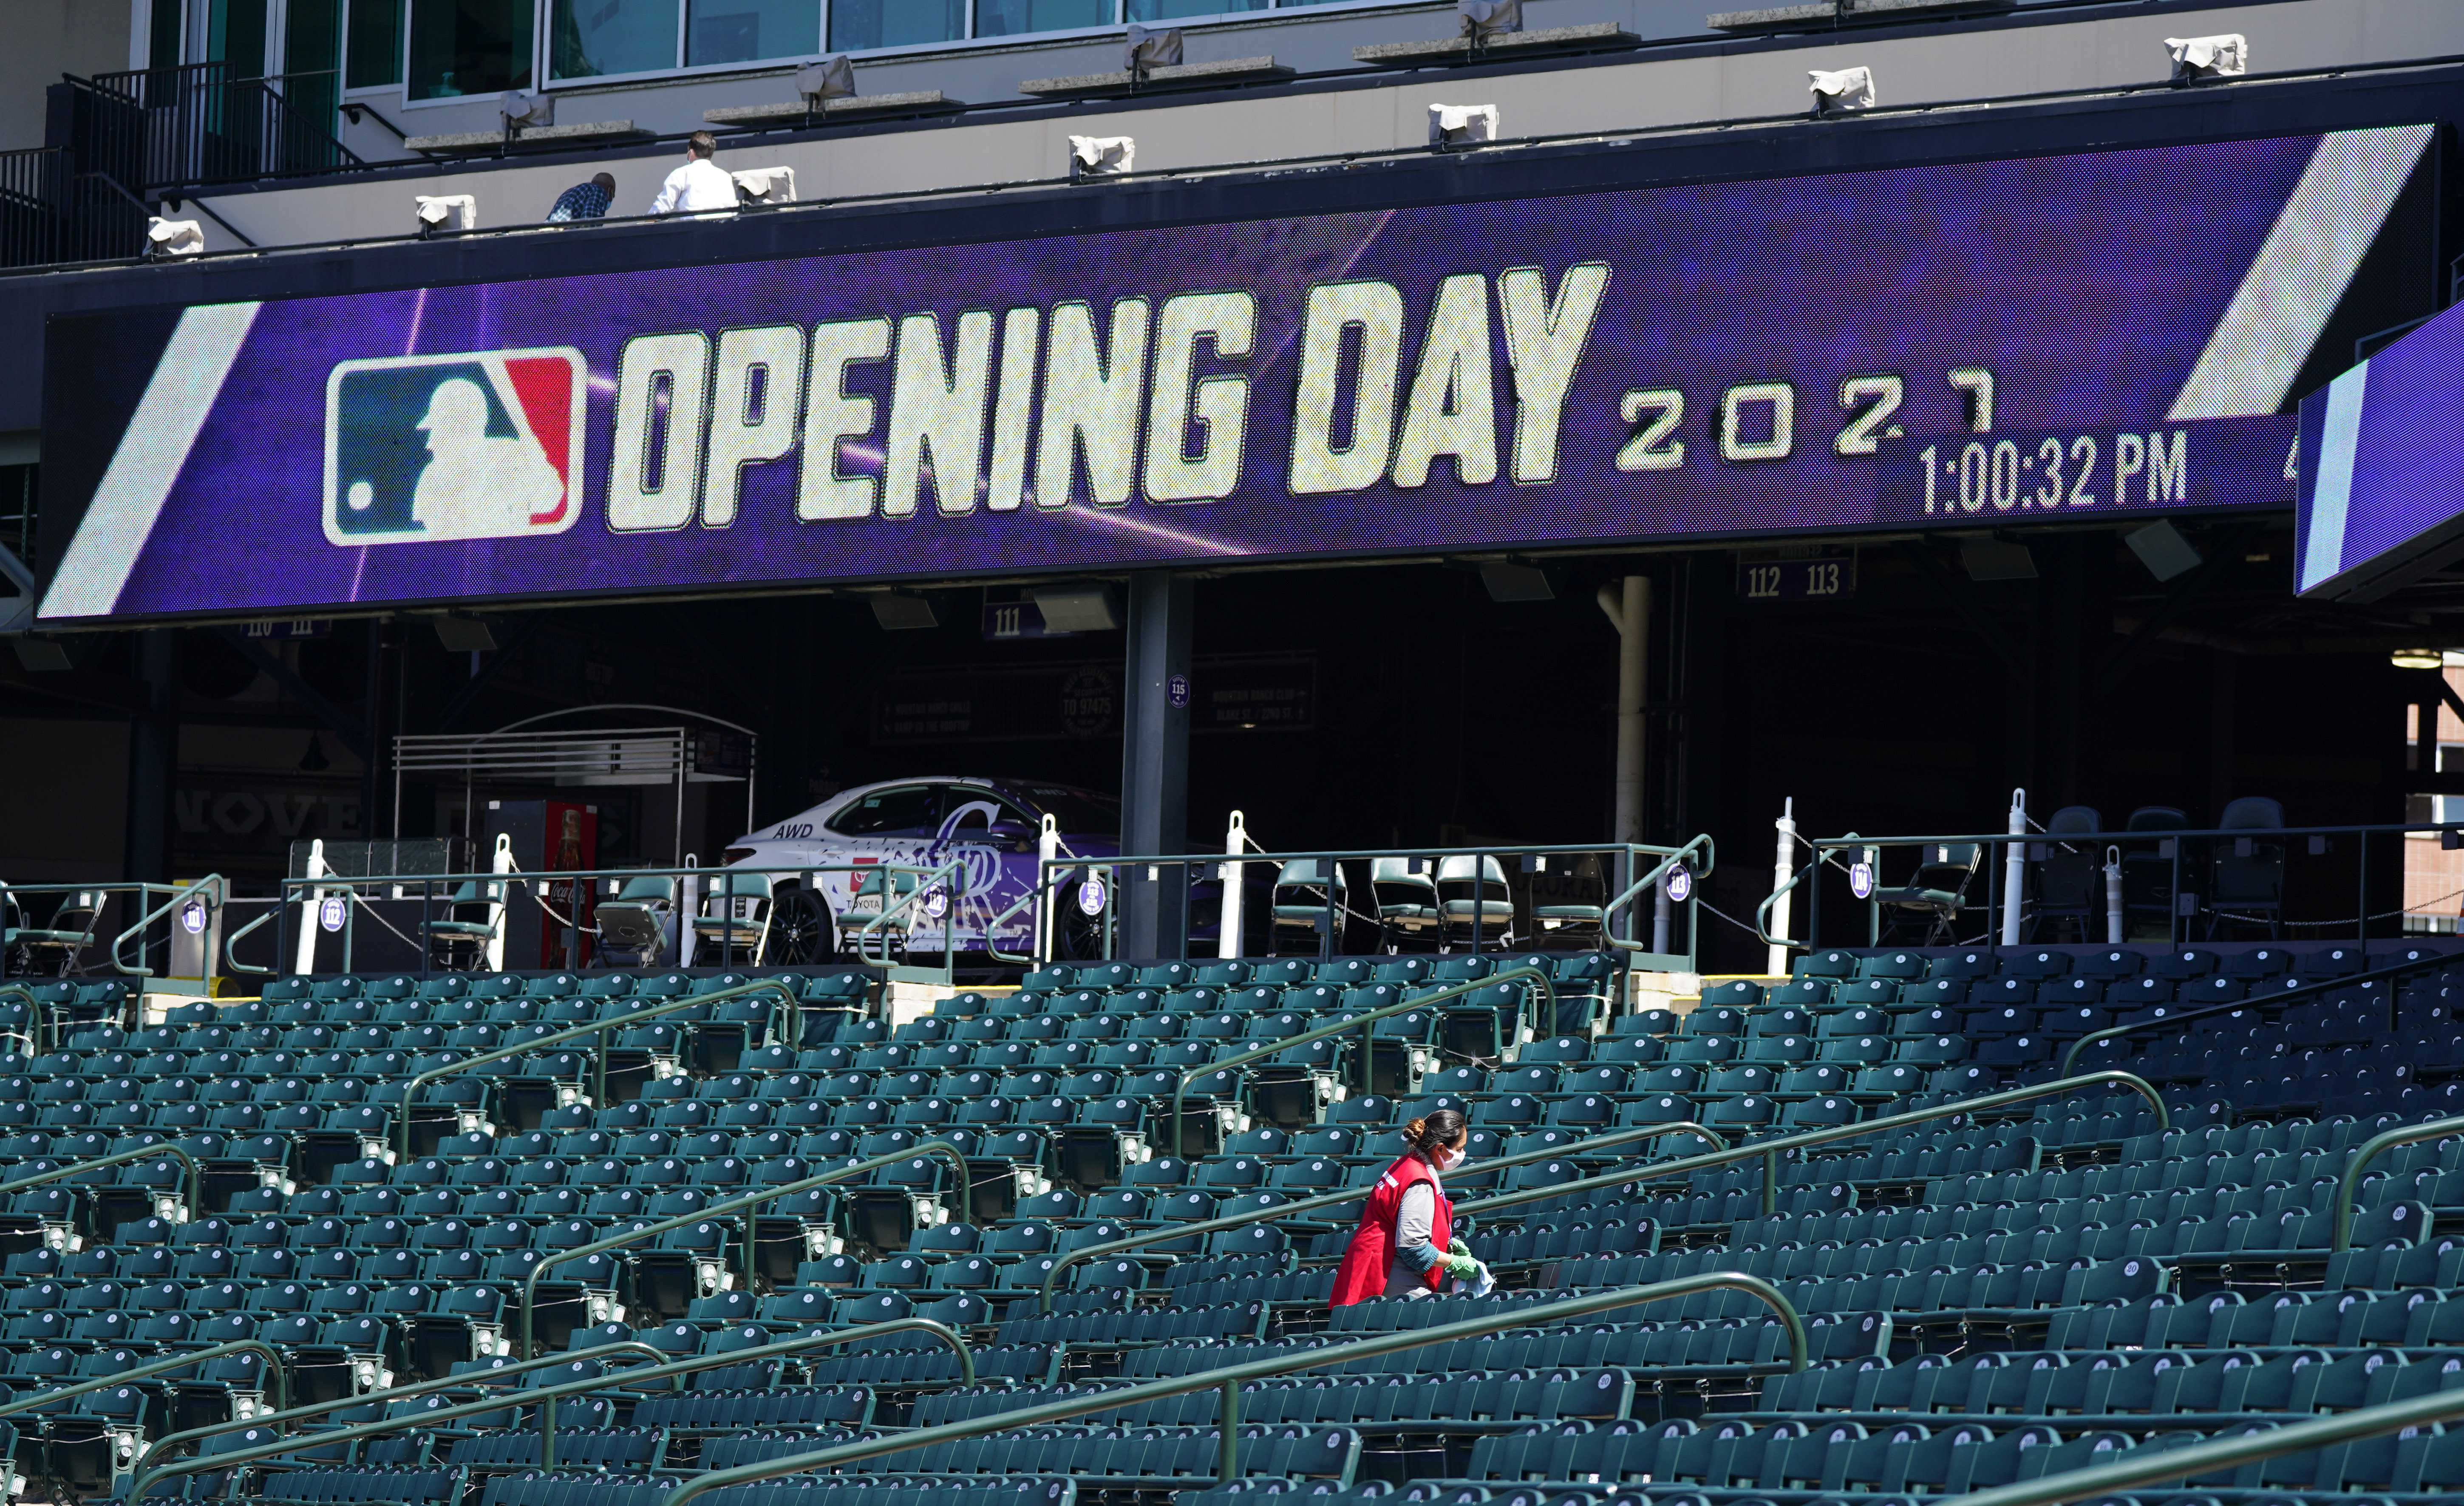 Texas Rangers allowing 100% capacity at stadium for opening day